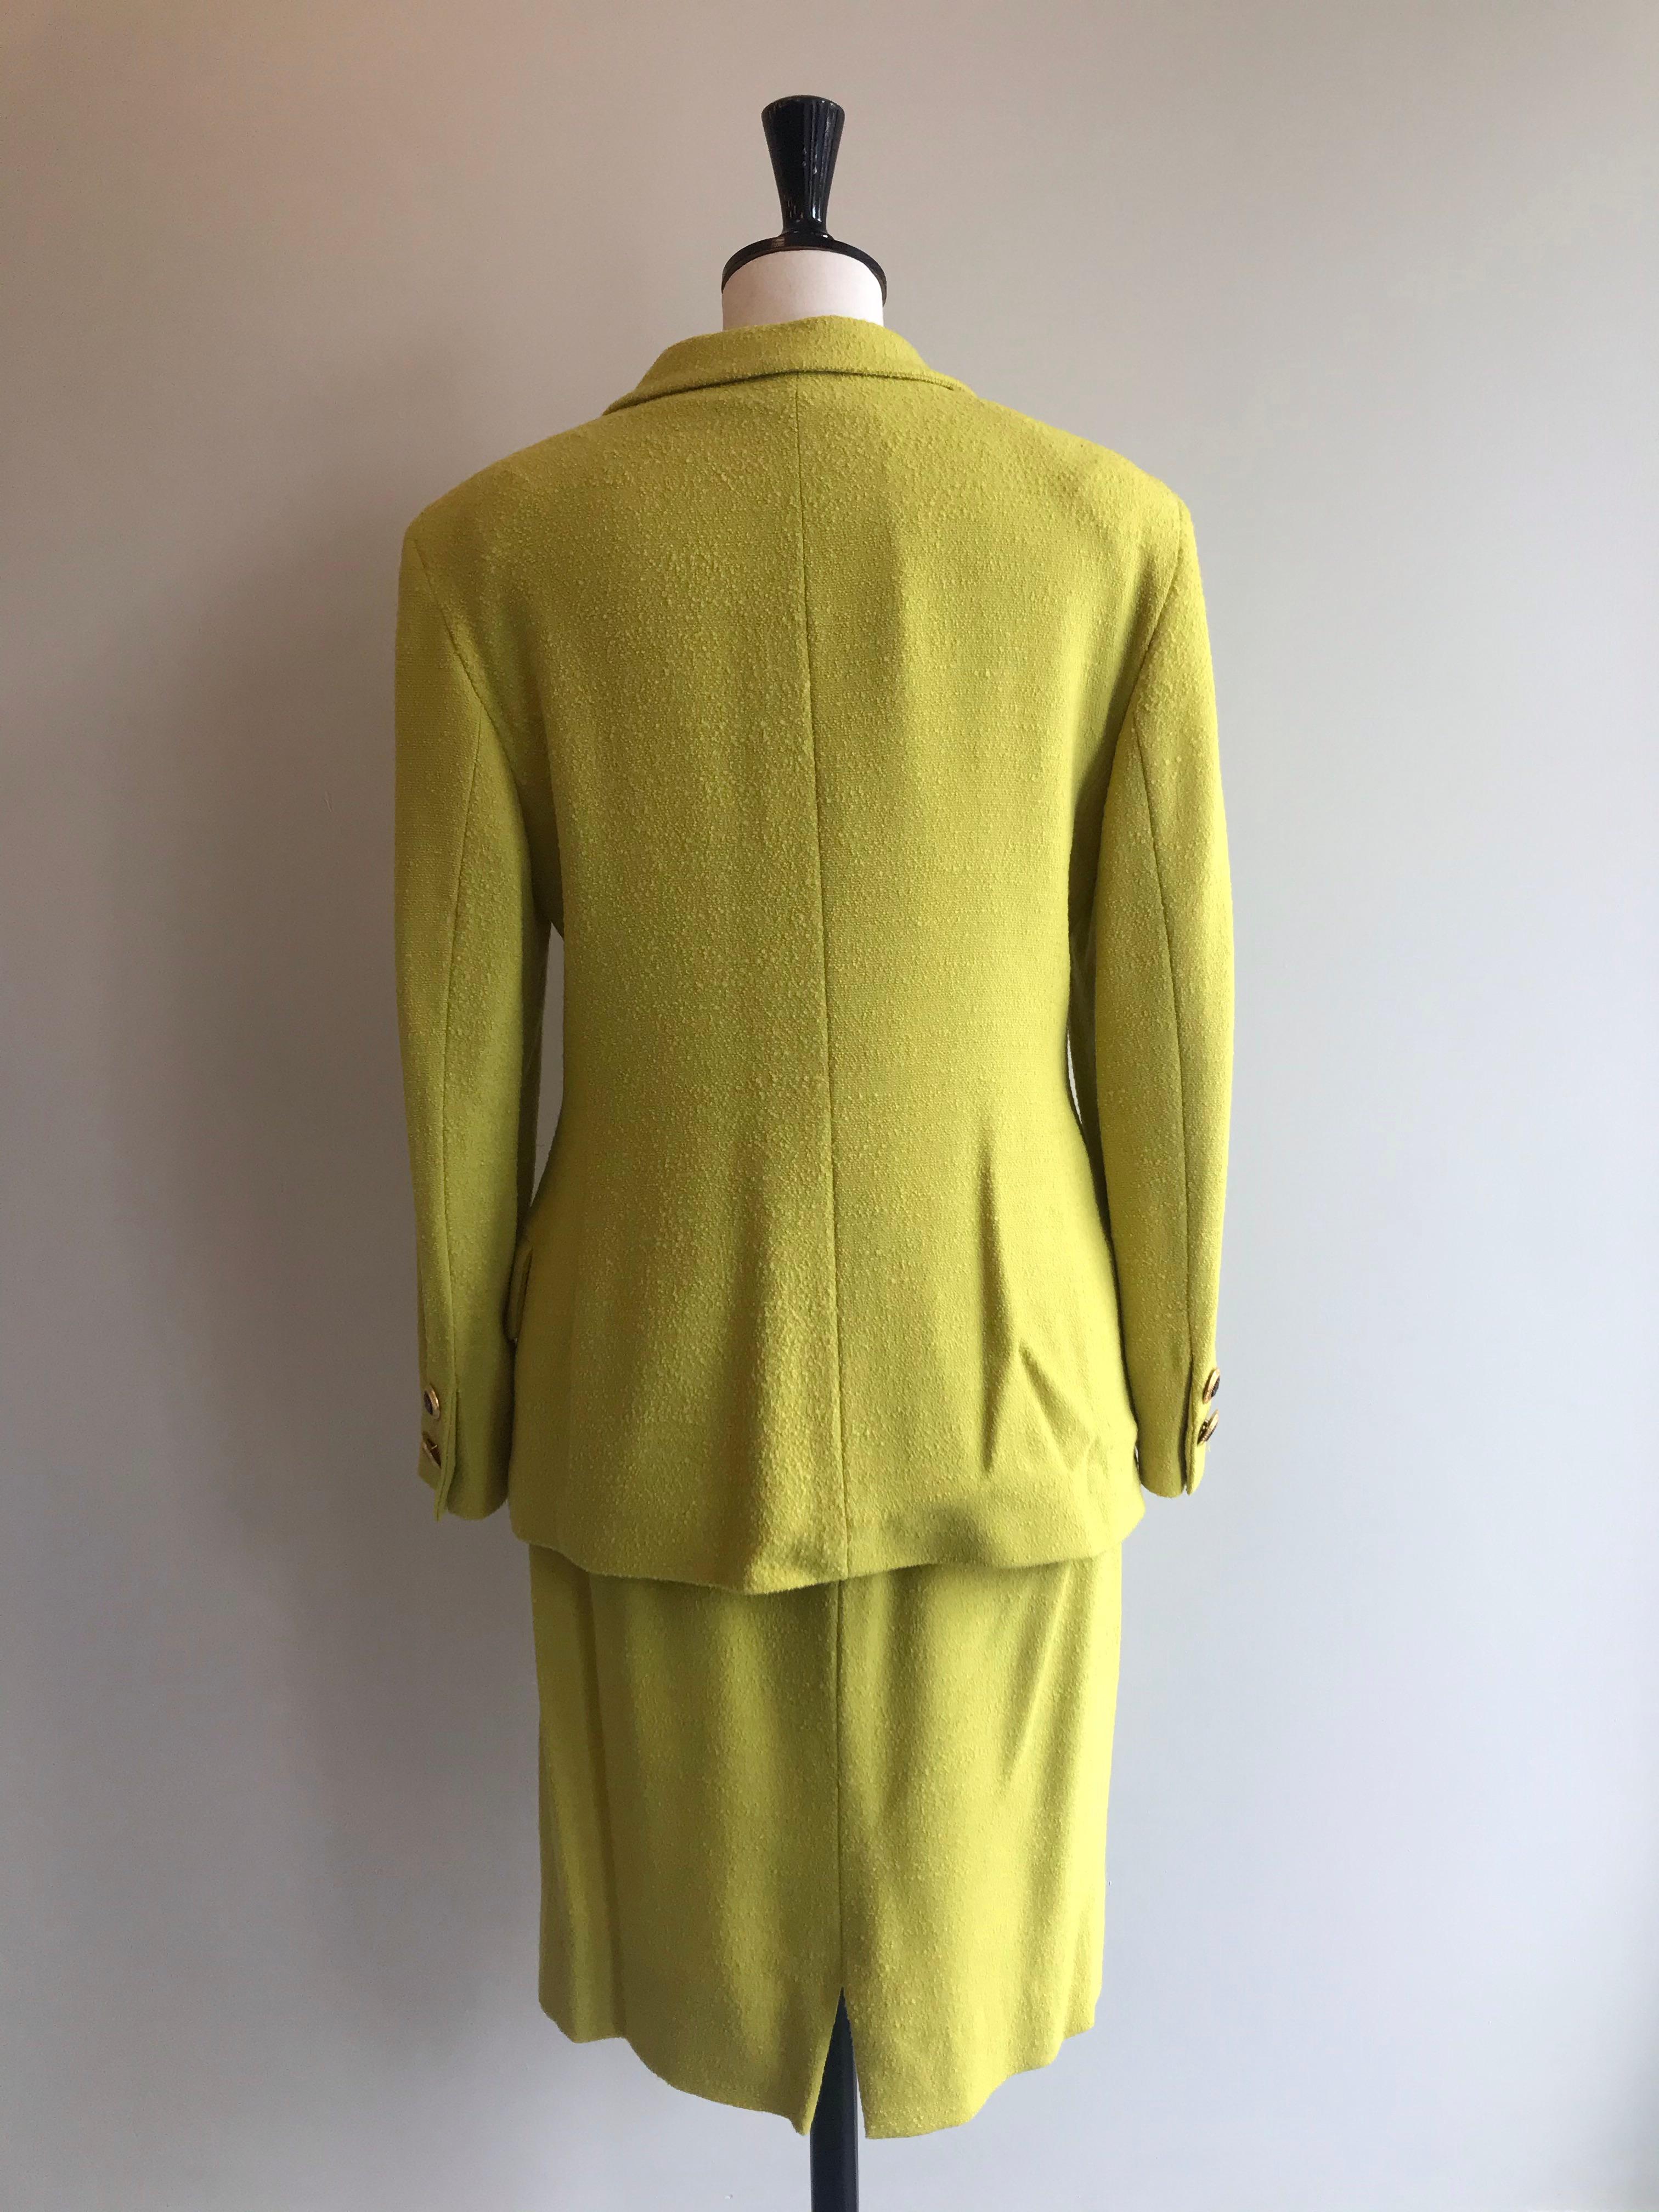 GV Versace Versatile Vintage Wool Skirt Suit In Excellent Condition For Sale In Glasgow, GB